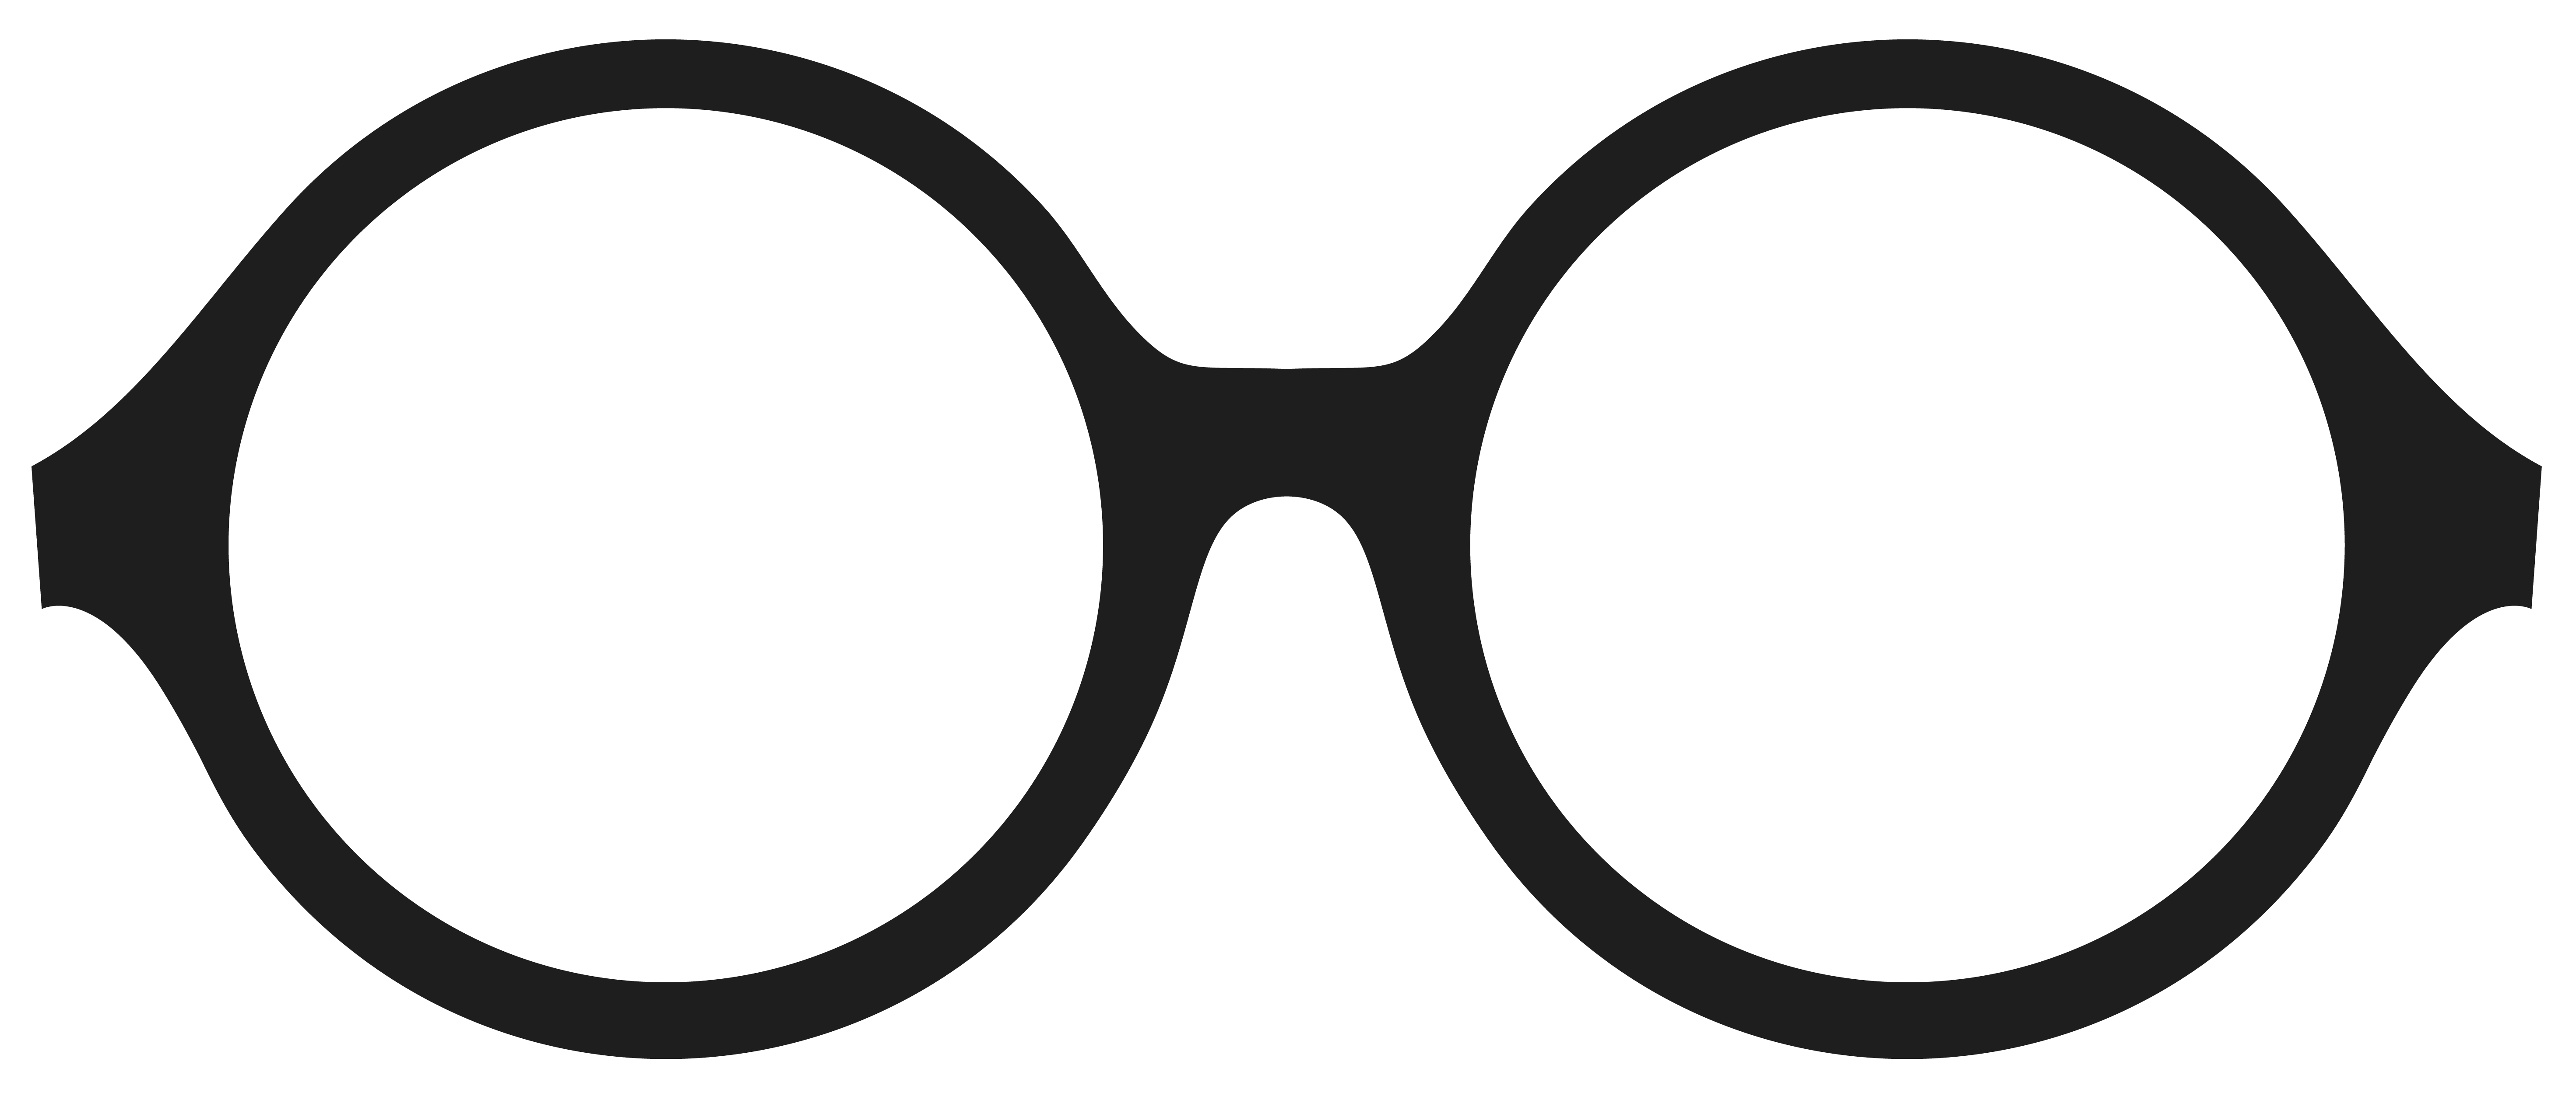 Goggles clipart x2 nokia. Glasses png images free